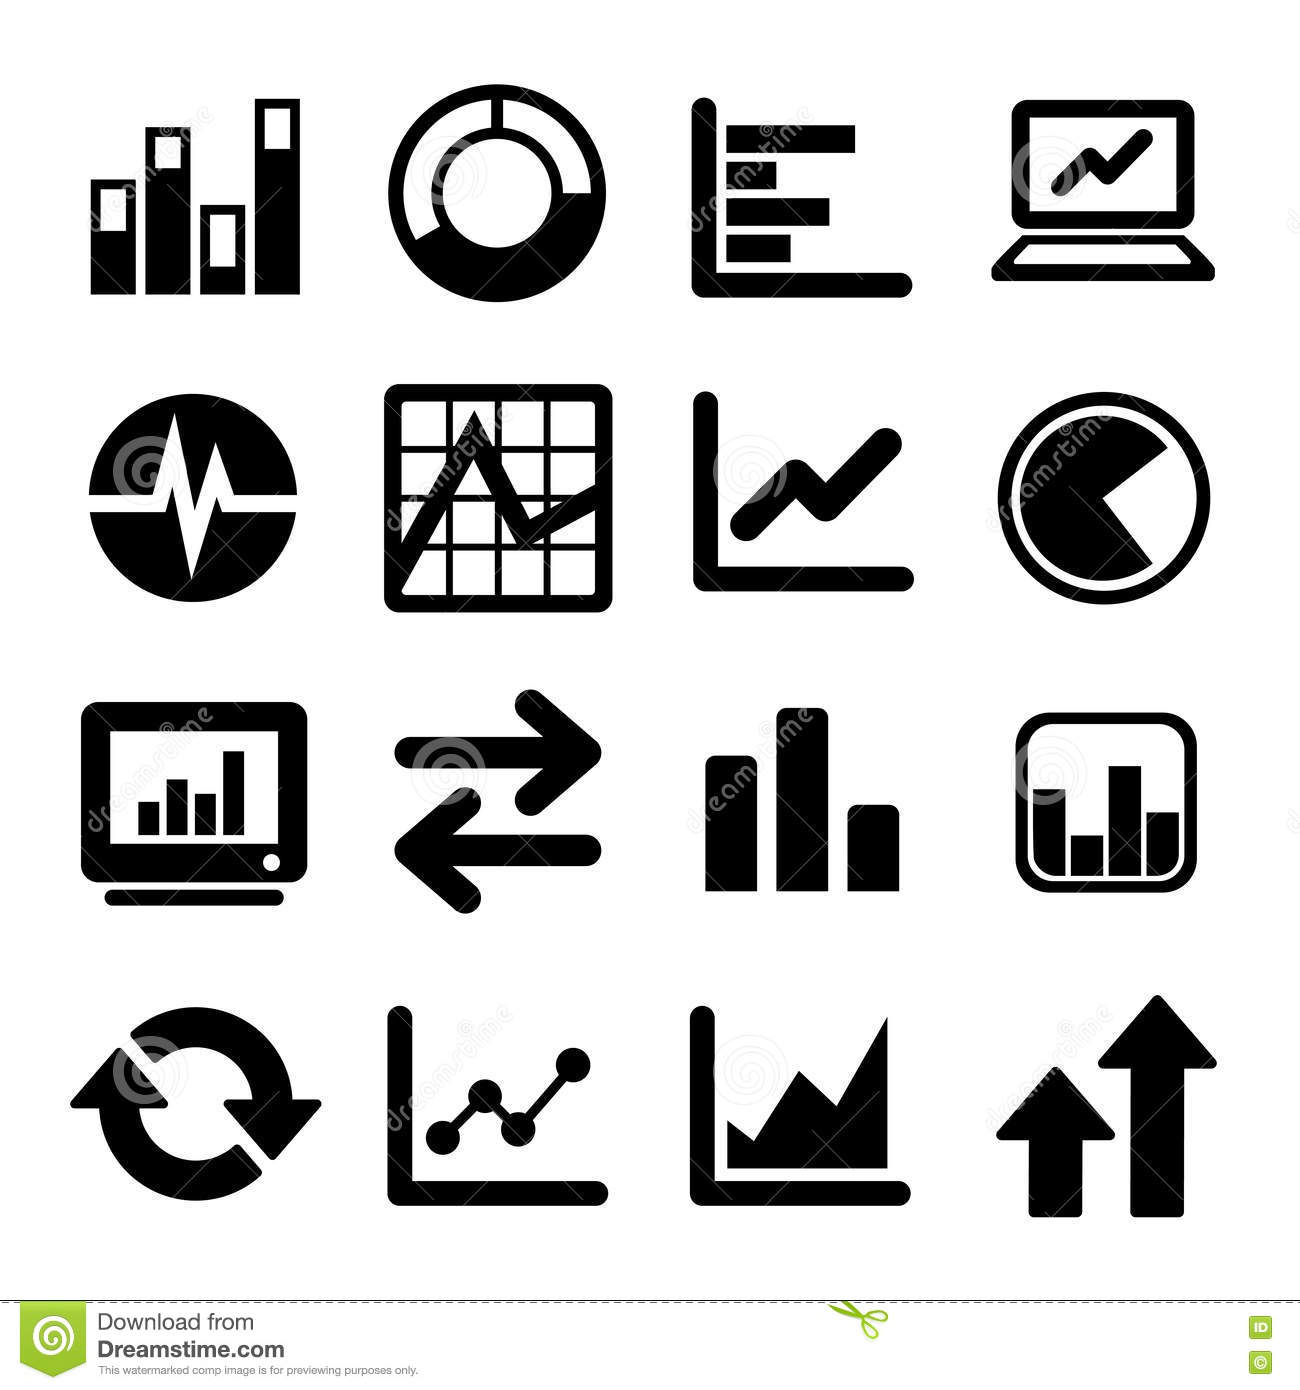 Infographic Business Icons